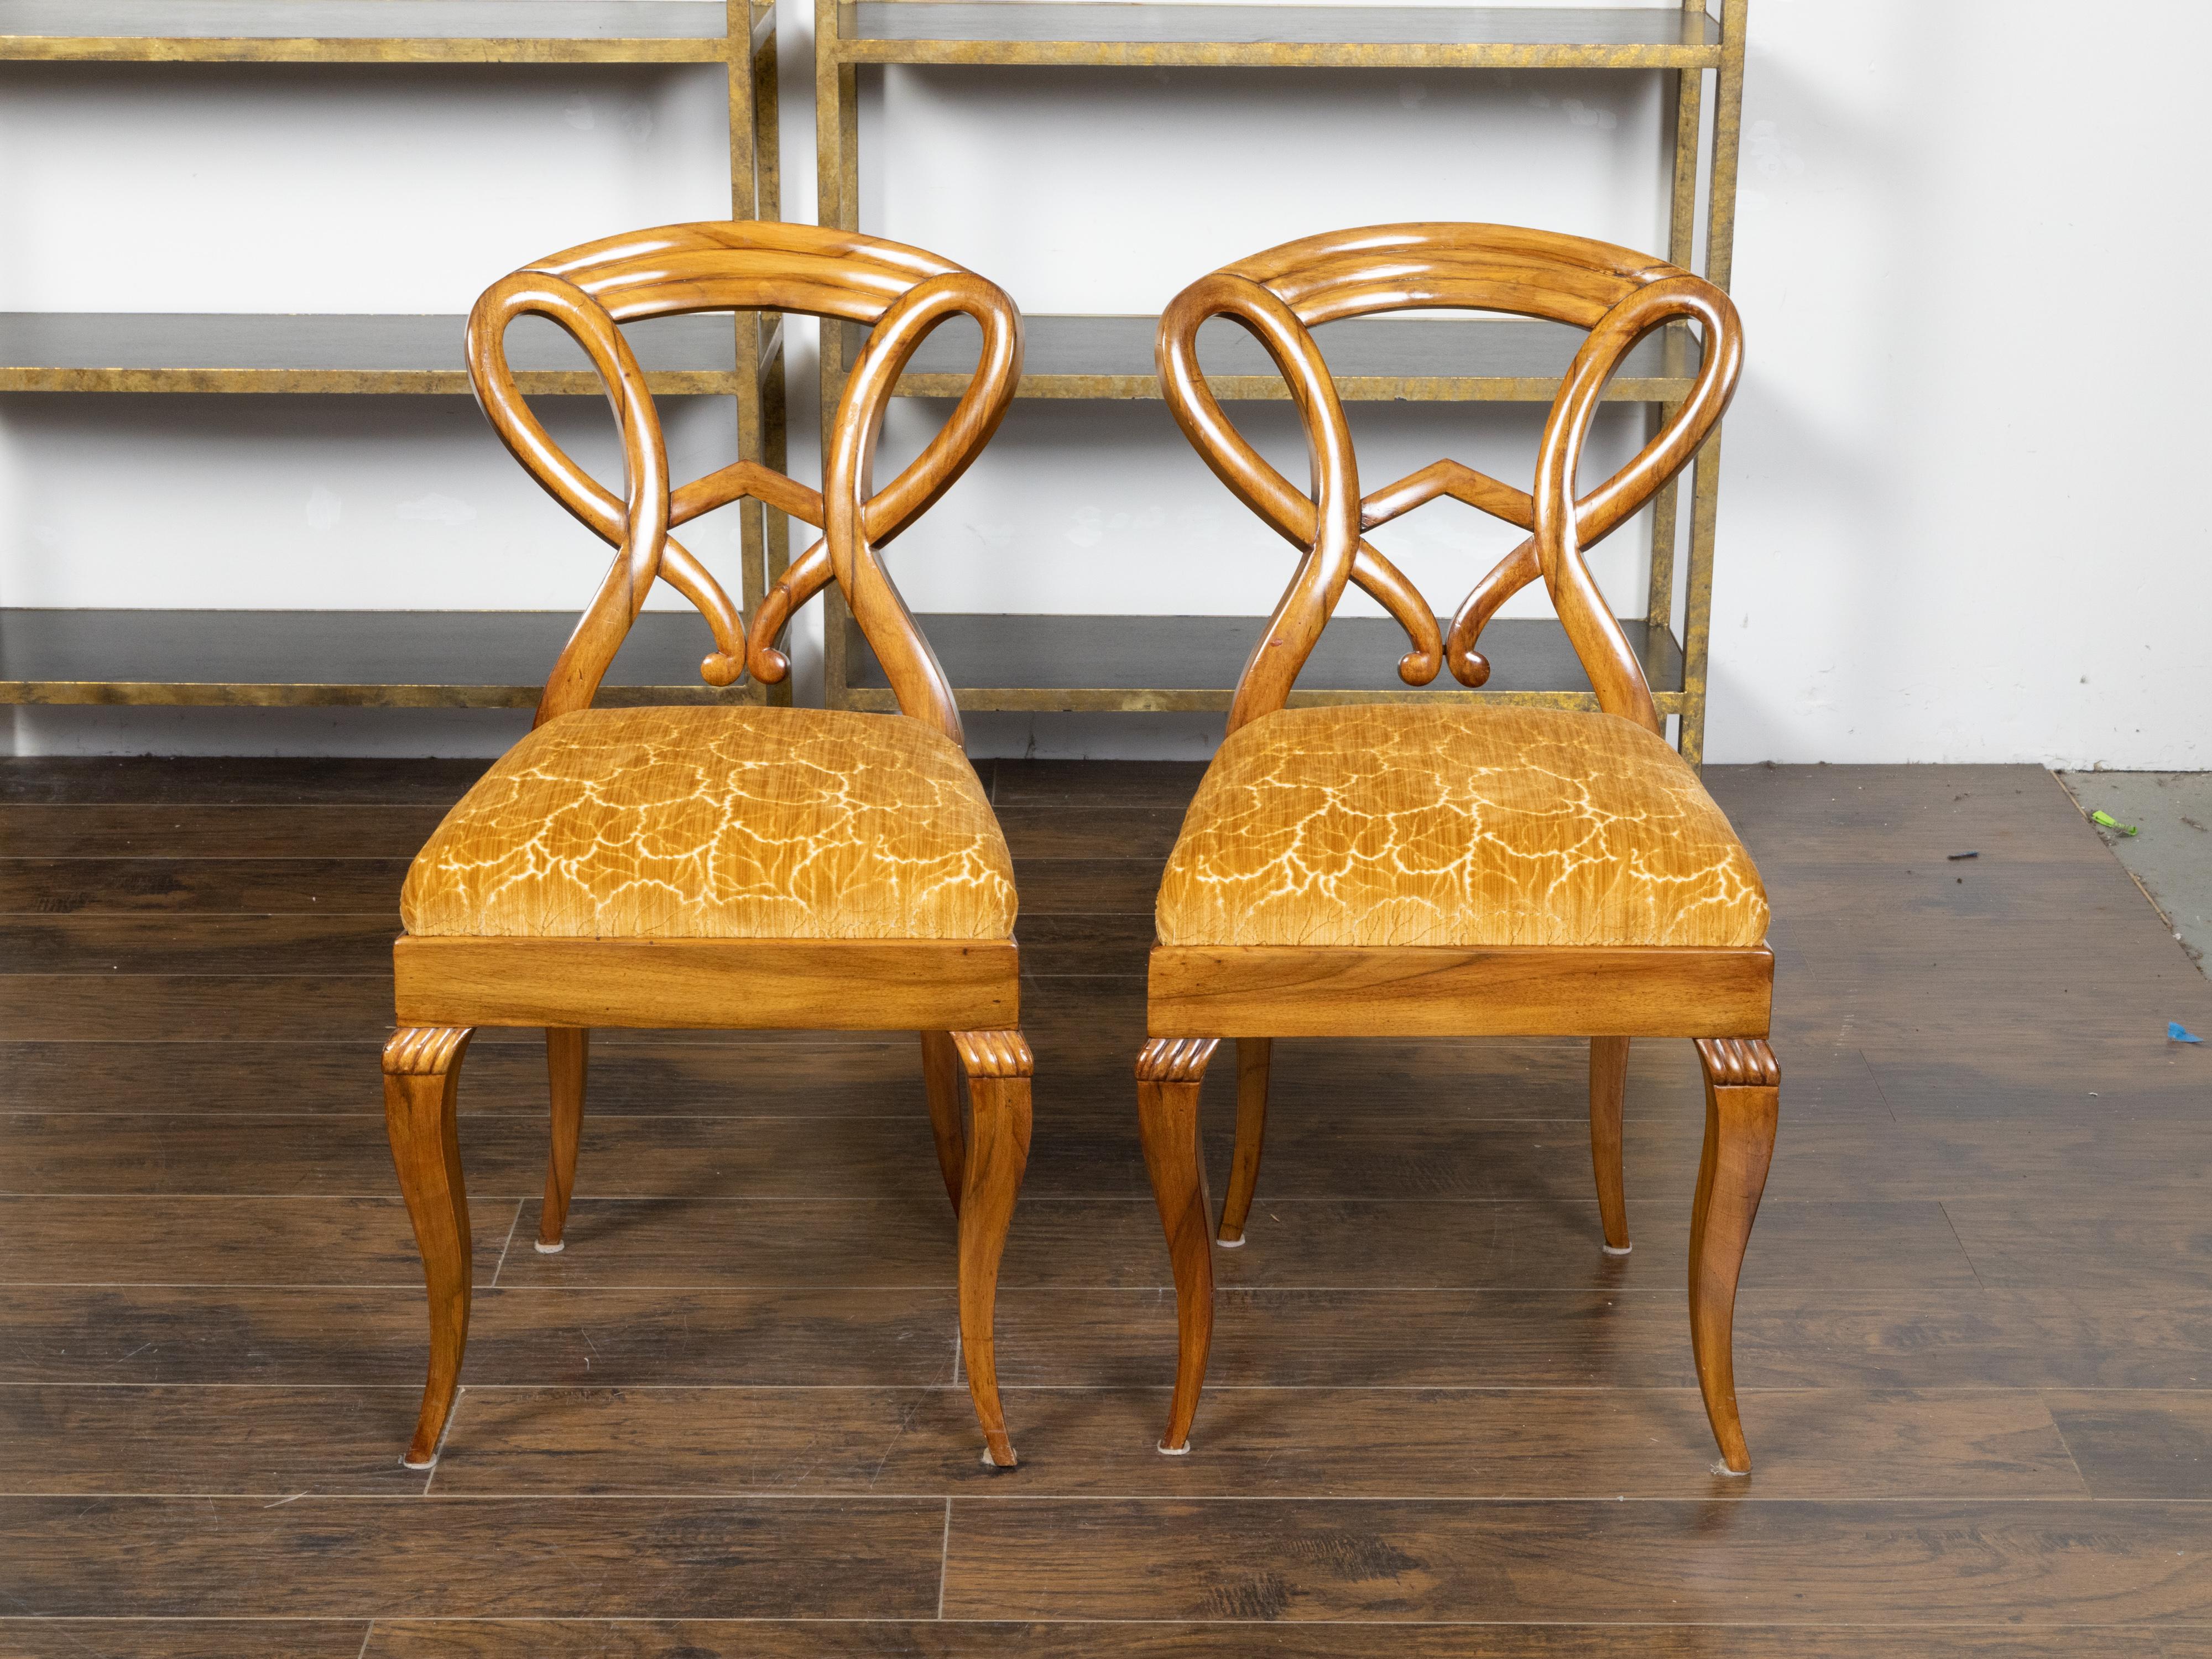 A pair of Austrian Biedermeier period side chairs from the 19th century, with unusual carved open backs, curving legs, carved gadroon motifs and leaf themed upholstery. Created in Austria during the 19th century, this pair of Biedermeier side chairs